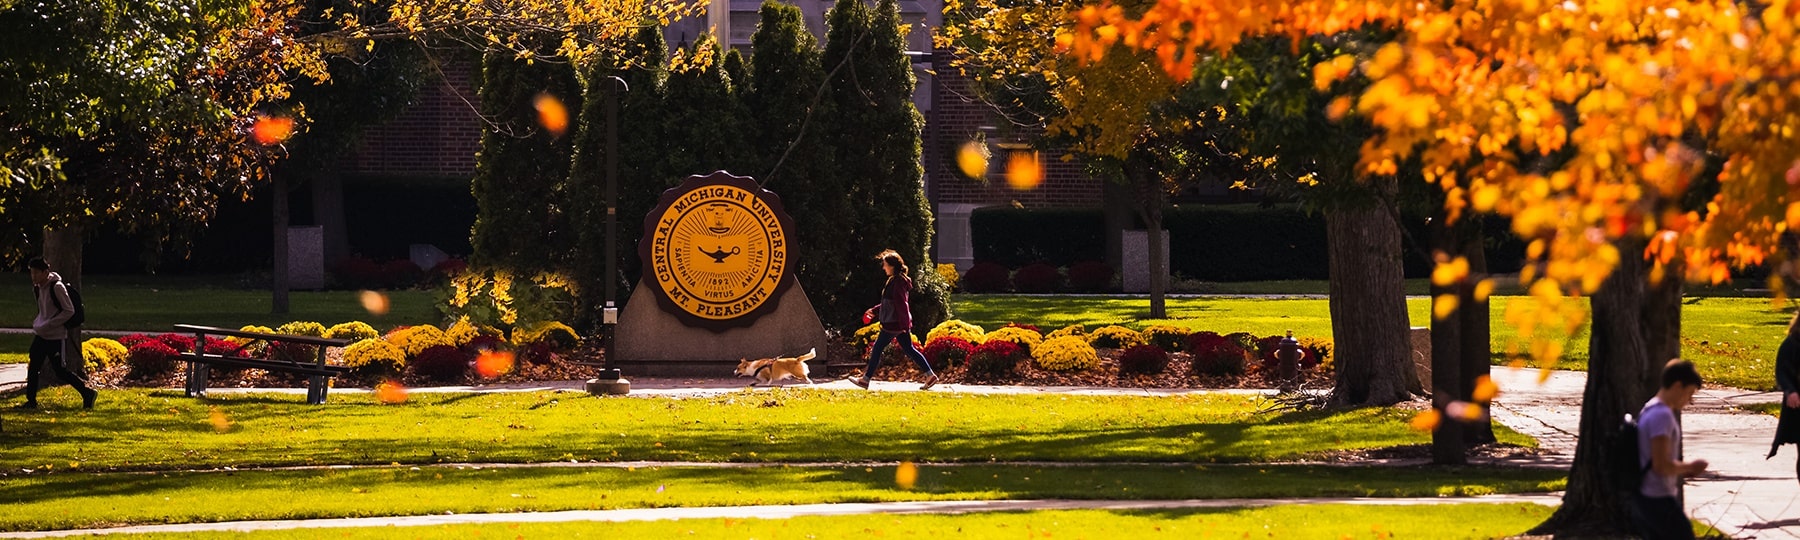 A woman walking a dog in front of the Central Michigan University seal.